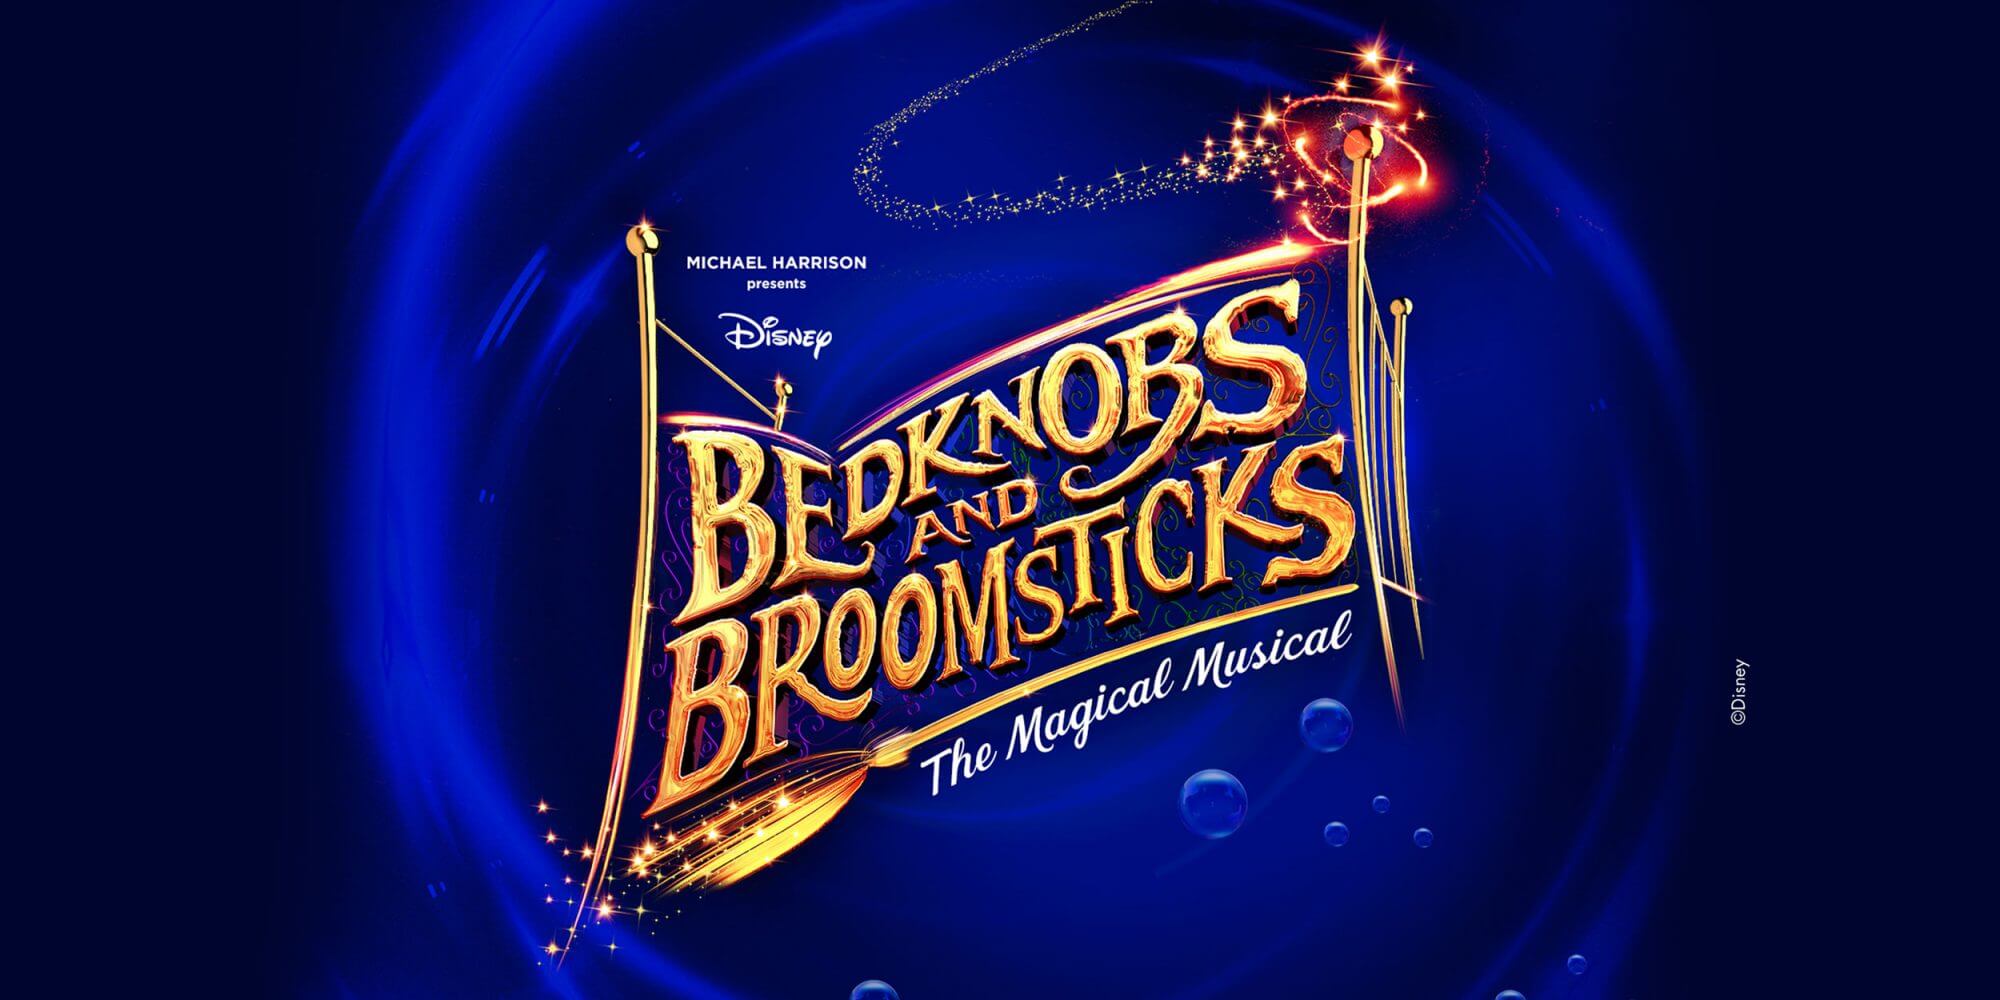 Casting Call for ‘Bedknobs and Broomsticks’ Musical